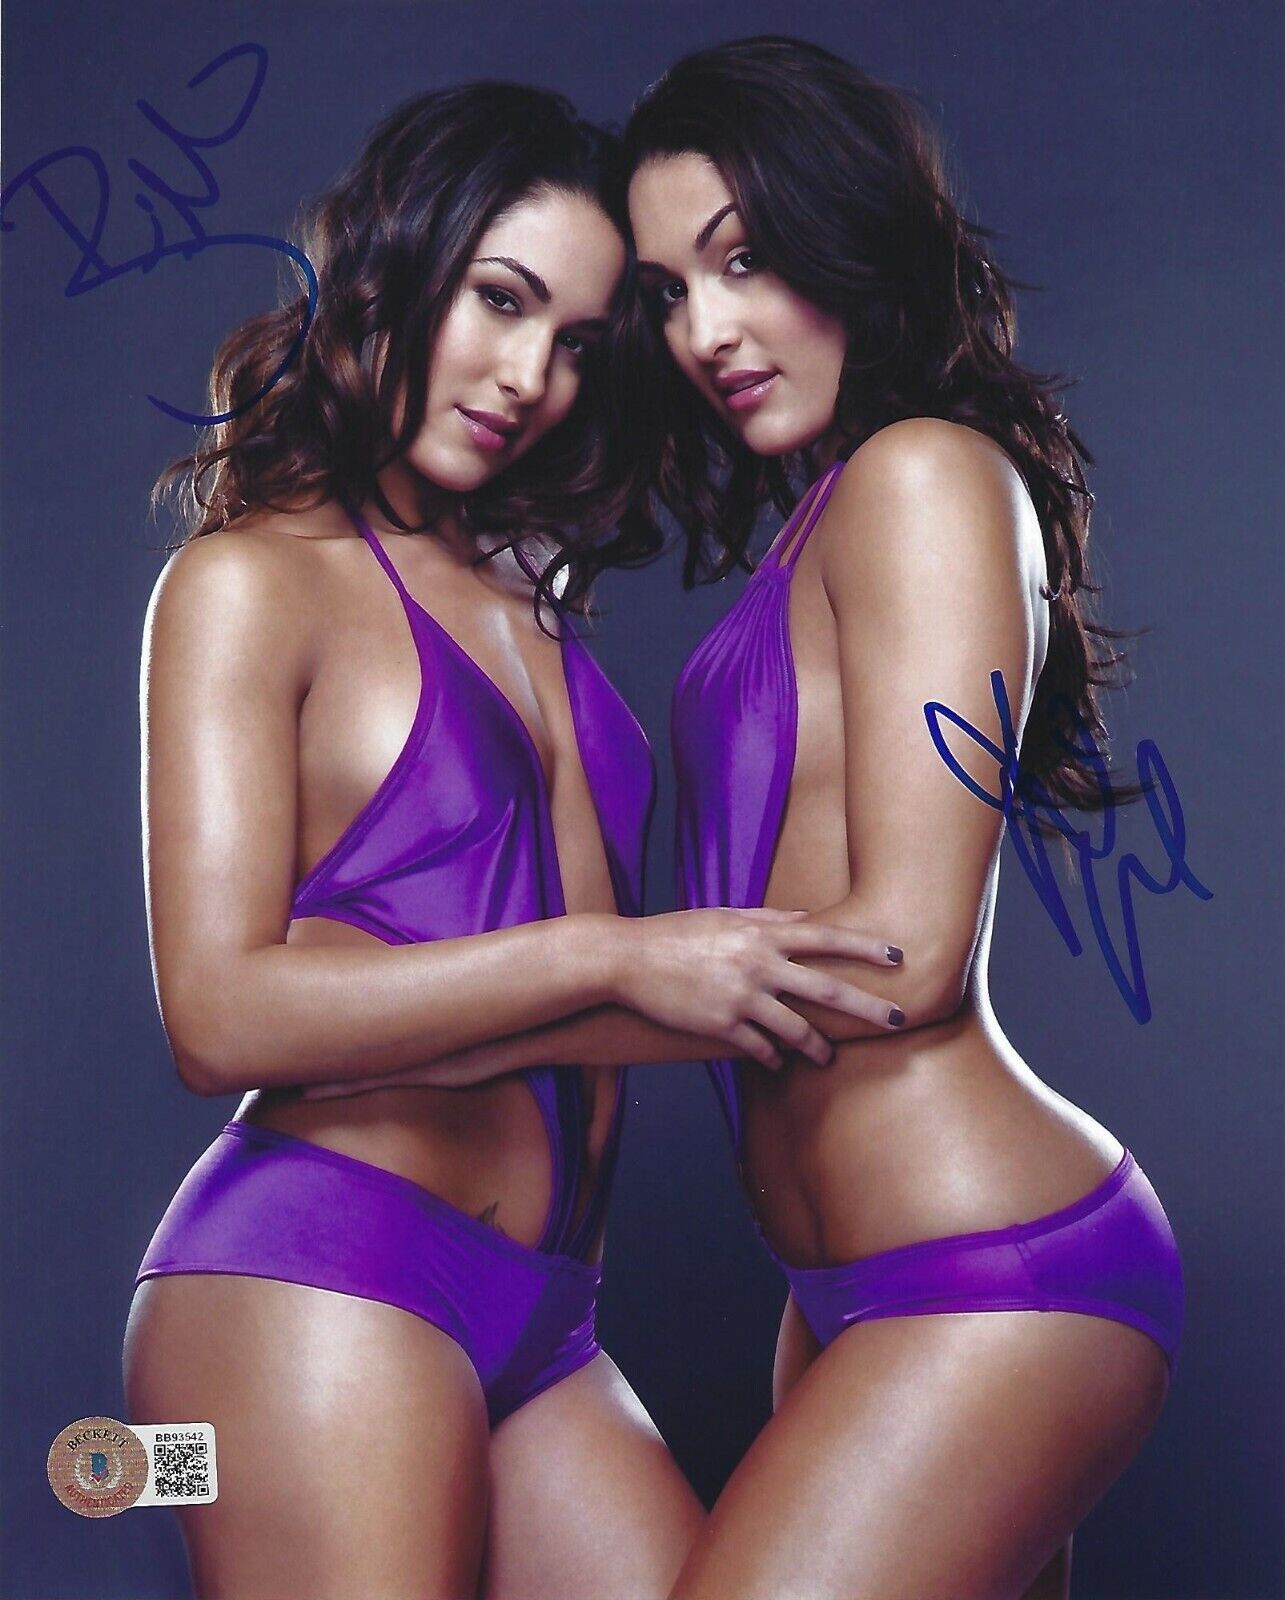 Nikki & Brie The Bella Twins Signed WWE 8x10 Photo Poster painting BAS COA NXT Picture Autograph